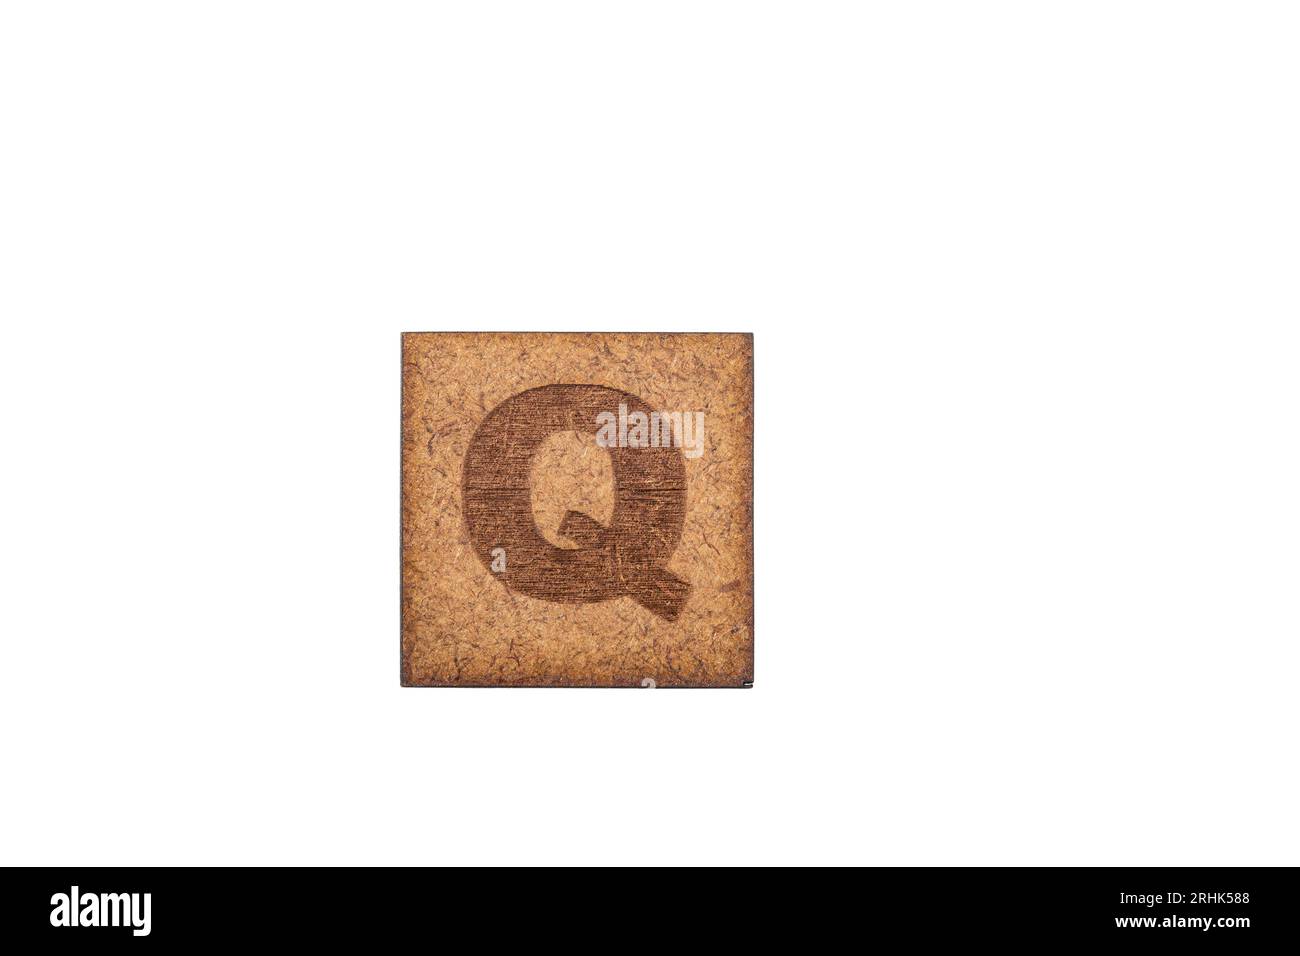 Capital Letter In Square Wooden Tiles - Letter Q, On White Background. Stock Photo